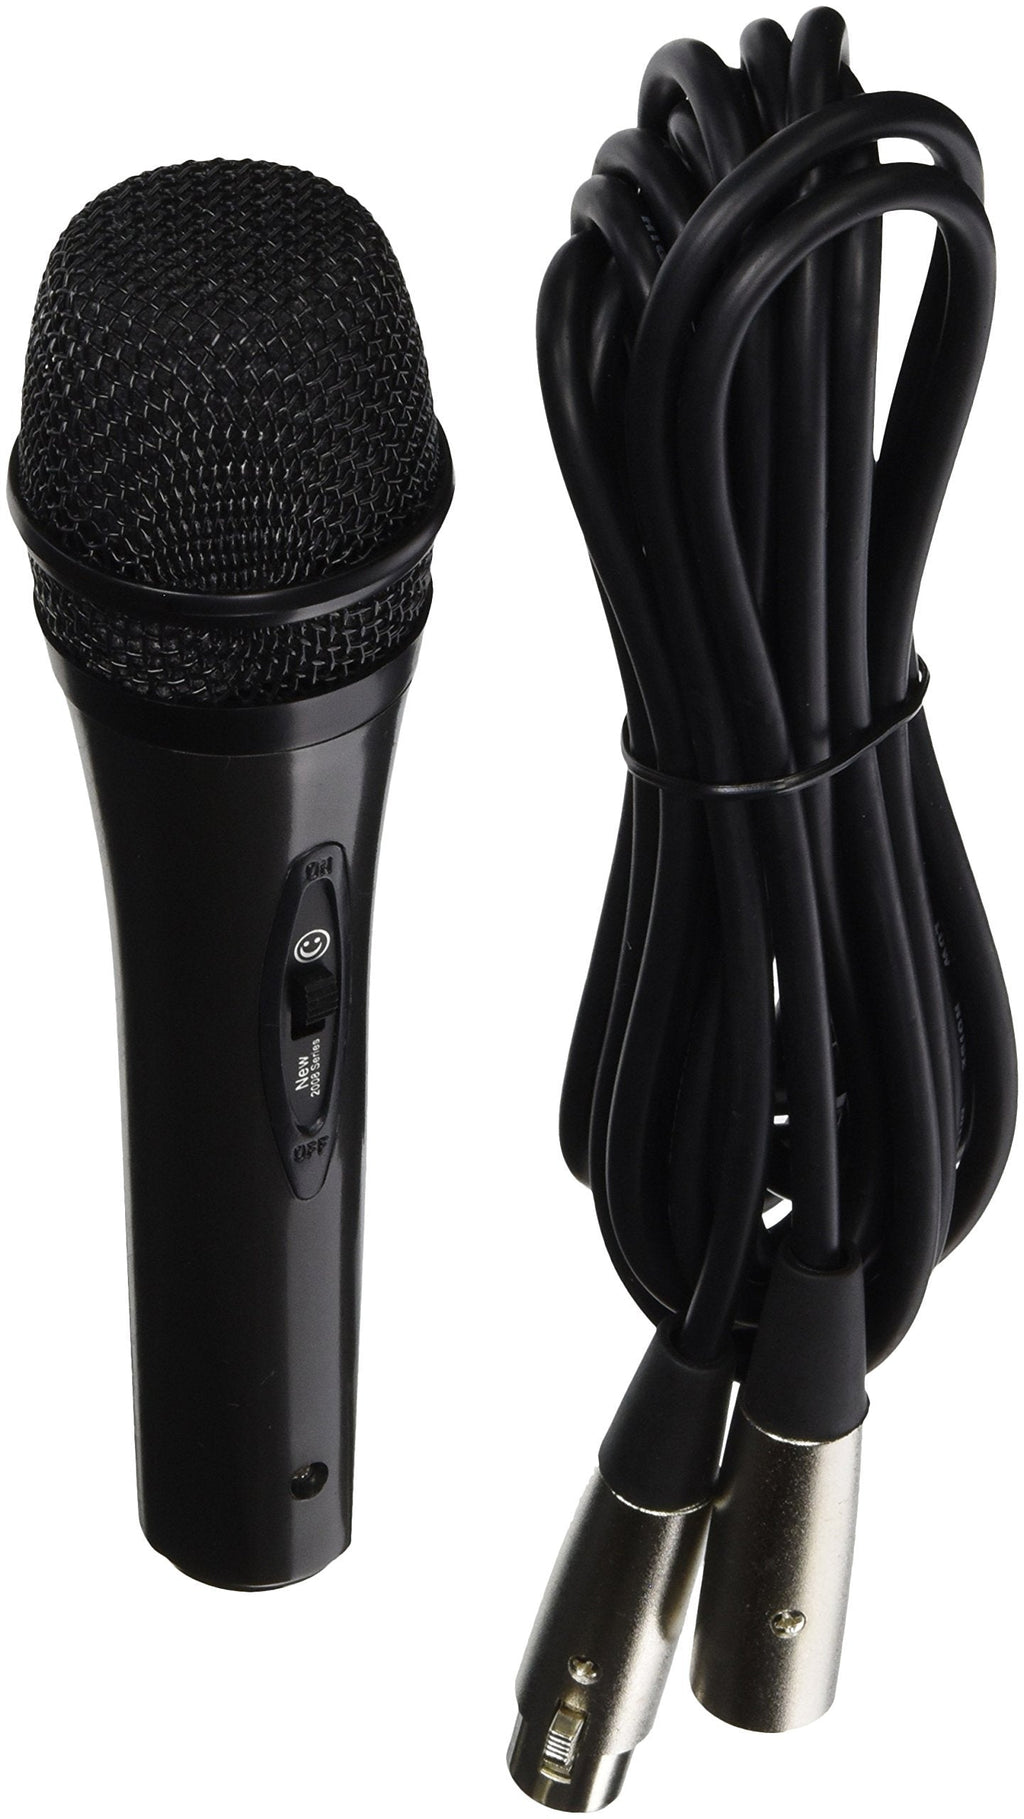 [AUSTRALIA] - Alphasonik Professional Grade Universal Cardioid Multi-Directional Moving Coil Dynamic Handheld Vocal Microphone Internal Shock Absorber Filter On-Stage Studio, Home, Party, Karaoke with On/Off Switch Cardioid PRO Dynamic 